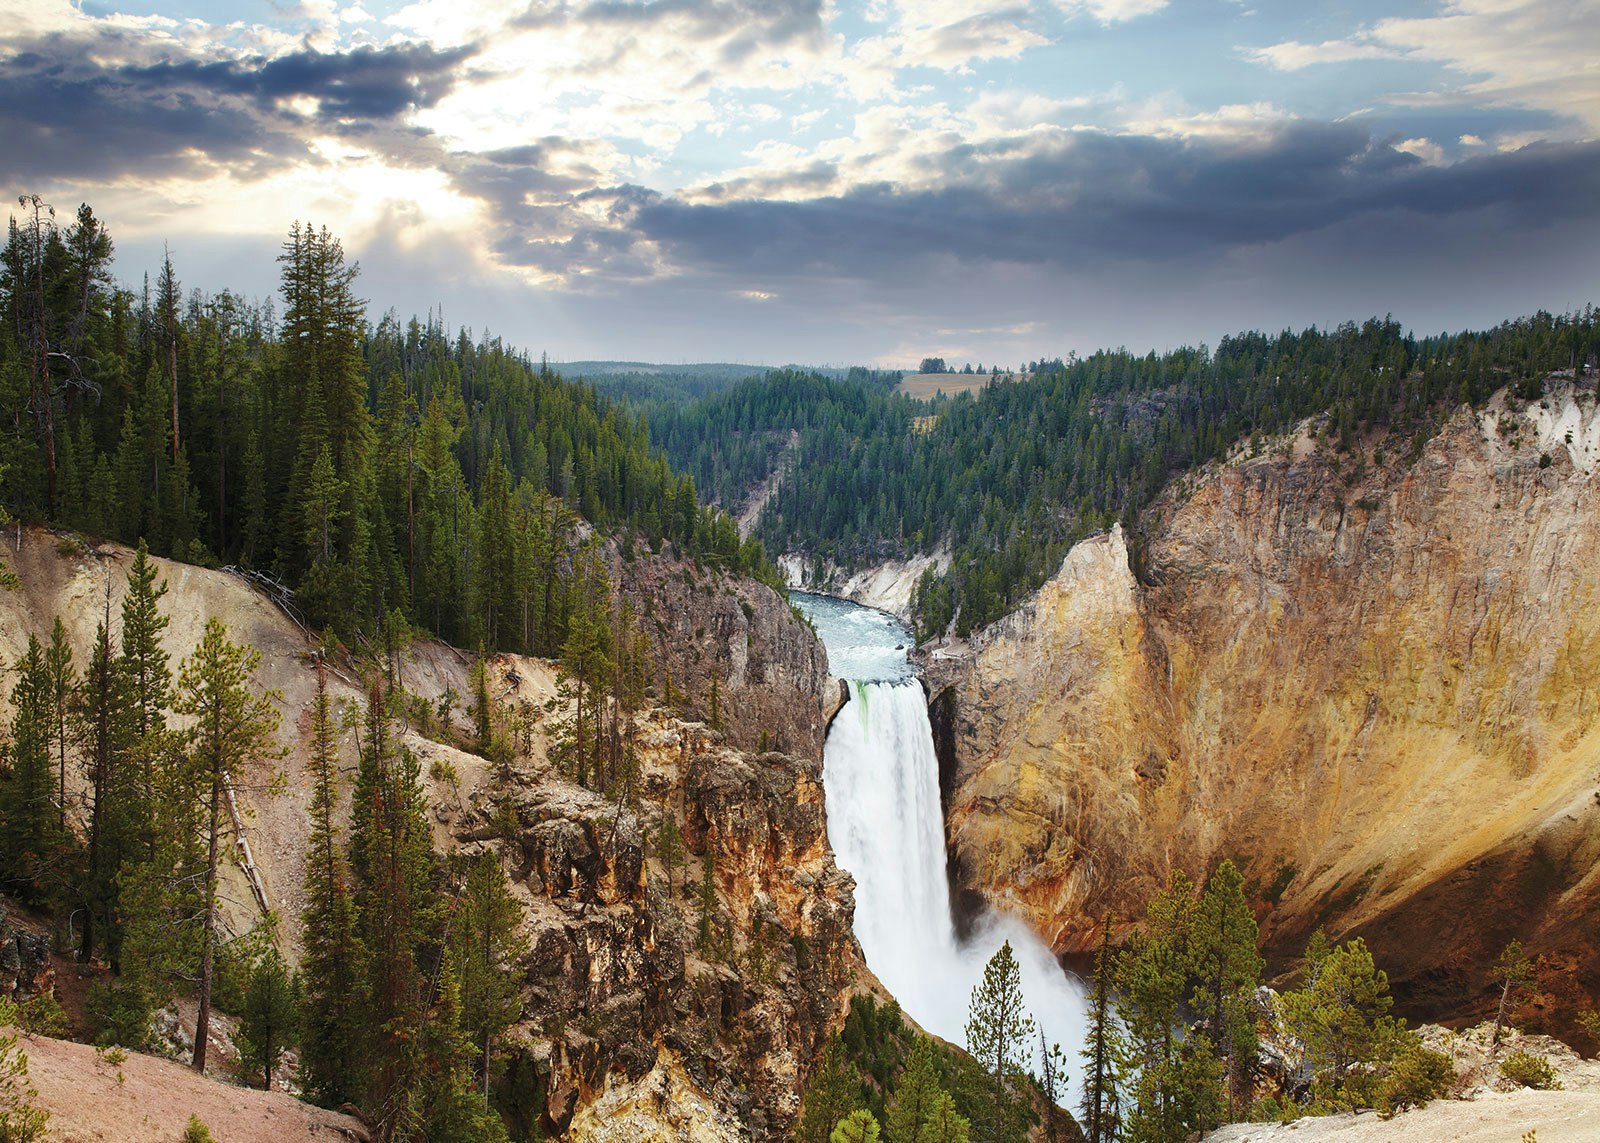 A panoramic view of Lower Falls, the tallest waterfall in Yellowstone National Park, plunging 308 feet into the Grand Canyon of the Yellowstone © Matt Munro / Lonely Planet